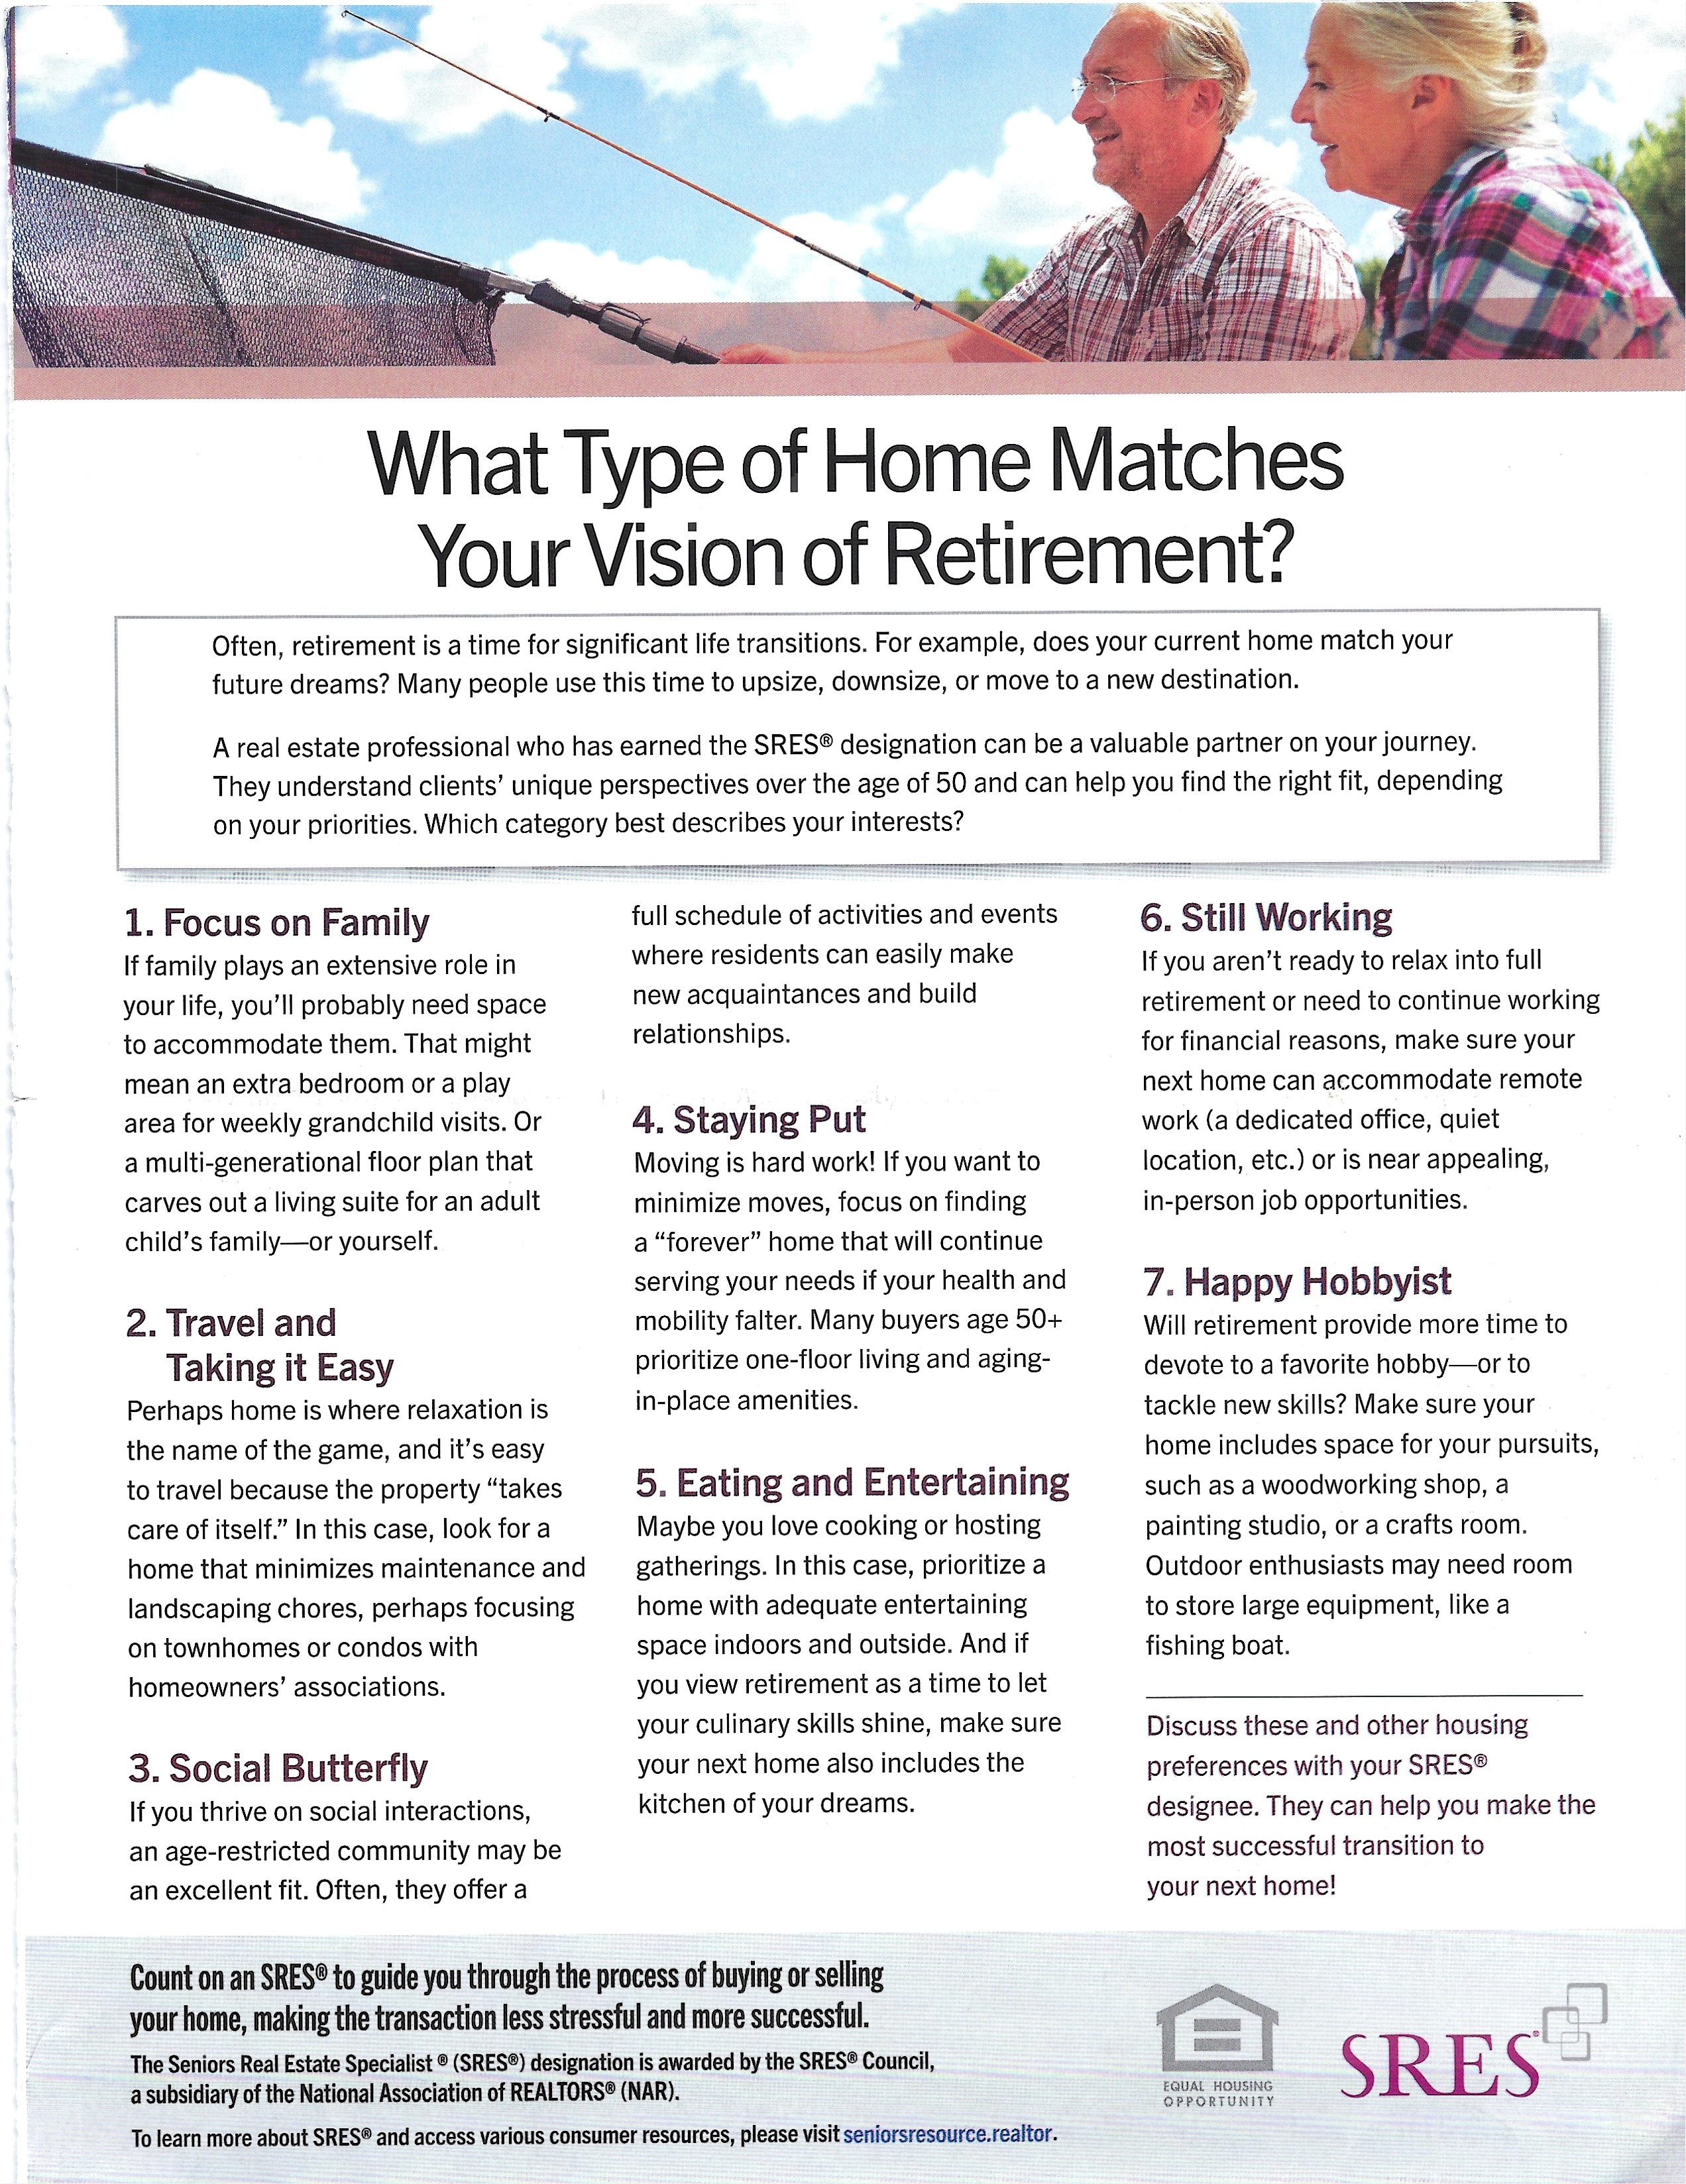 What Type Of Home Matches Your Vision Of Retirement?